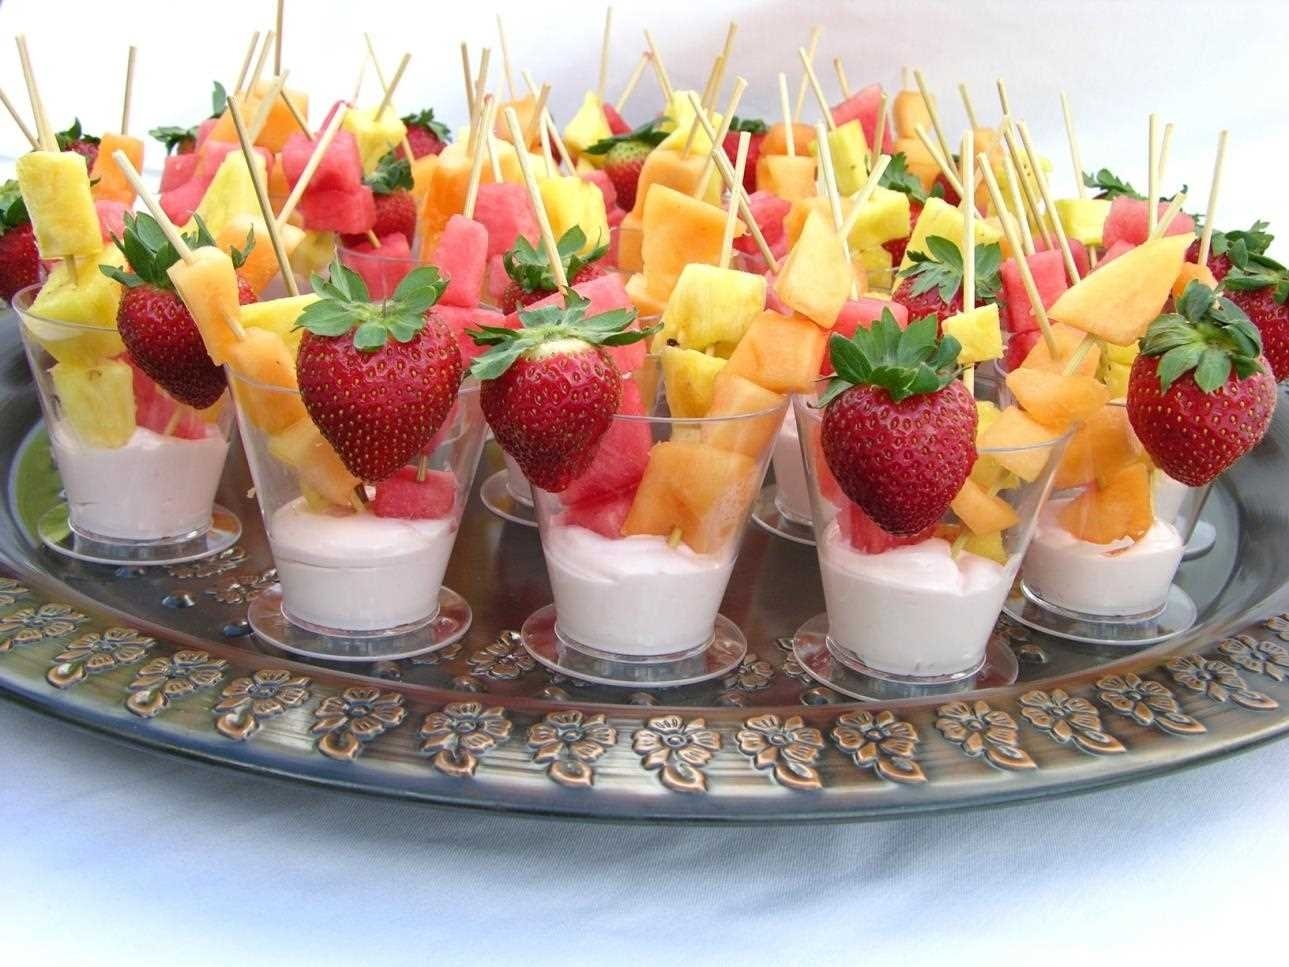 10 Great Cheap Catering Ideas For Wedding cheap food for wedding wedding ideas uxjj 2022